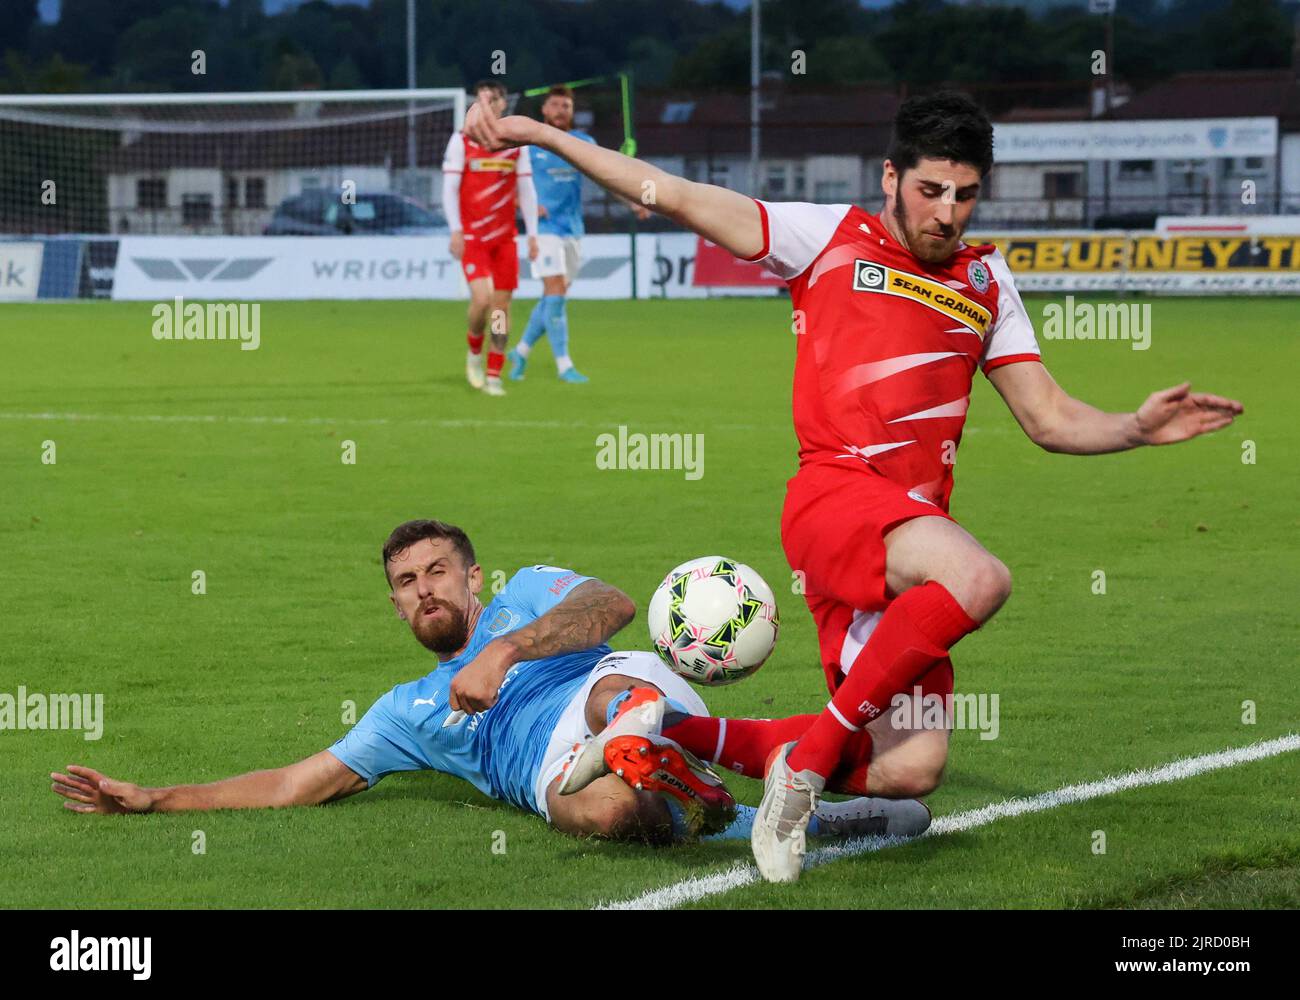 Ballymena Showgrounds, Ballymena, County Antrim,Northern Ireland, UK. 23 Aug 2022. Danske Bank Premiership – Ballymena United v Cliftonville (red). Action from tonight's game at The Showgrounds. Ballymena United's Stephen McCullough tackles Cliftonville's Kris Lowe. Credit: CAZIMB/Alamy Live News. Stock Photo